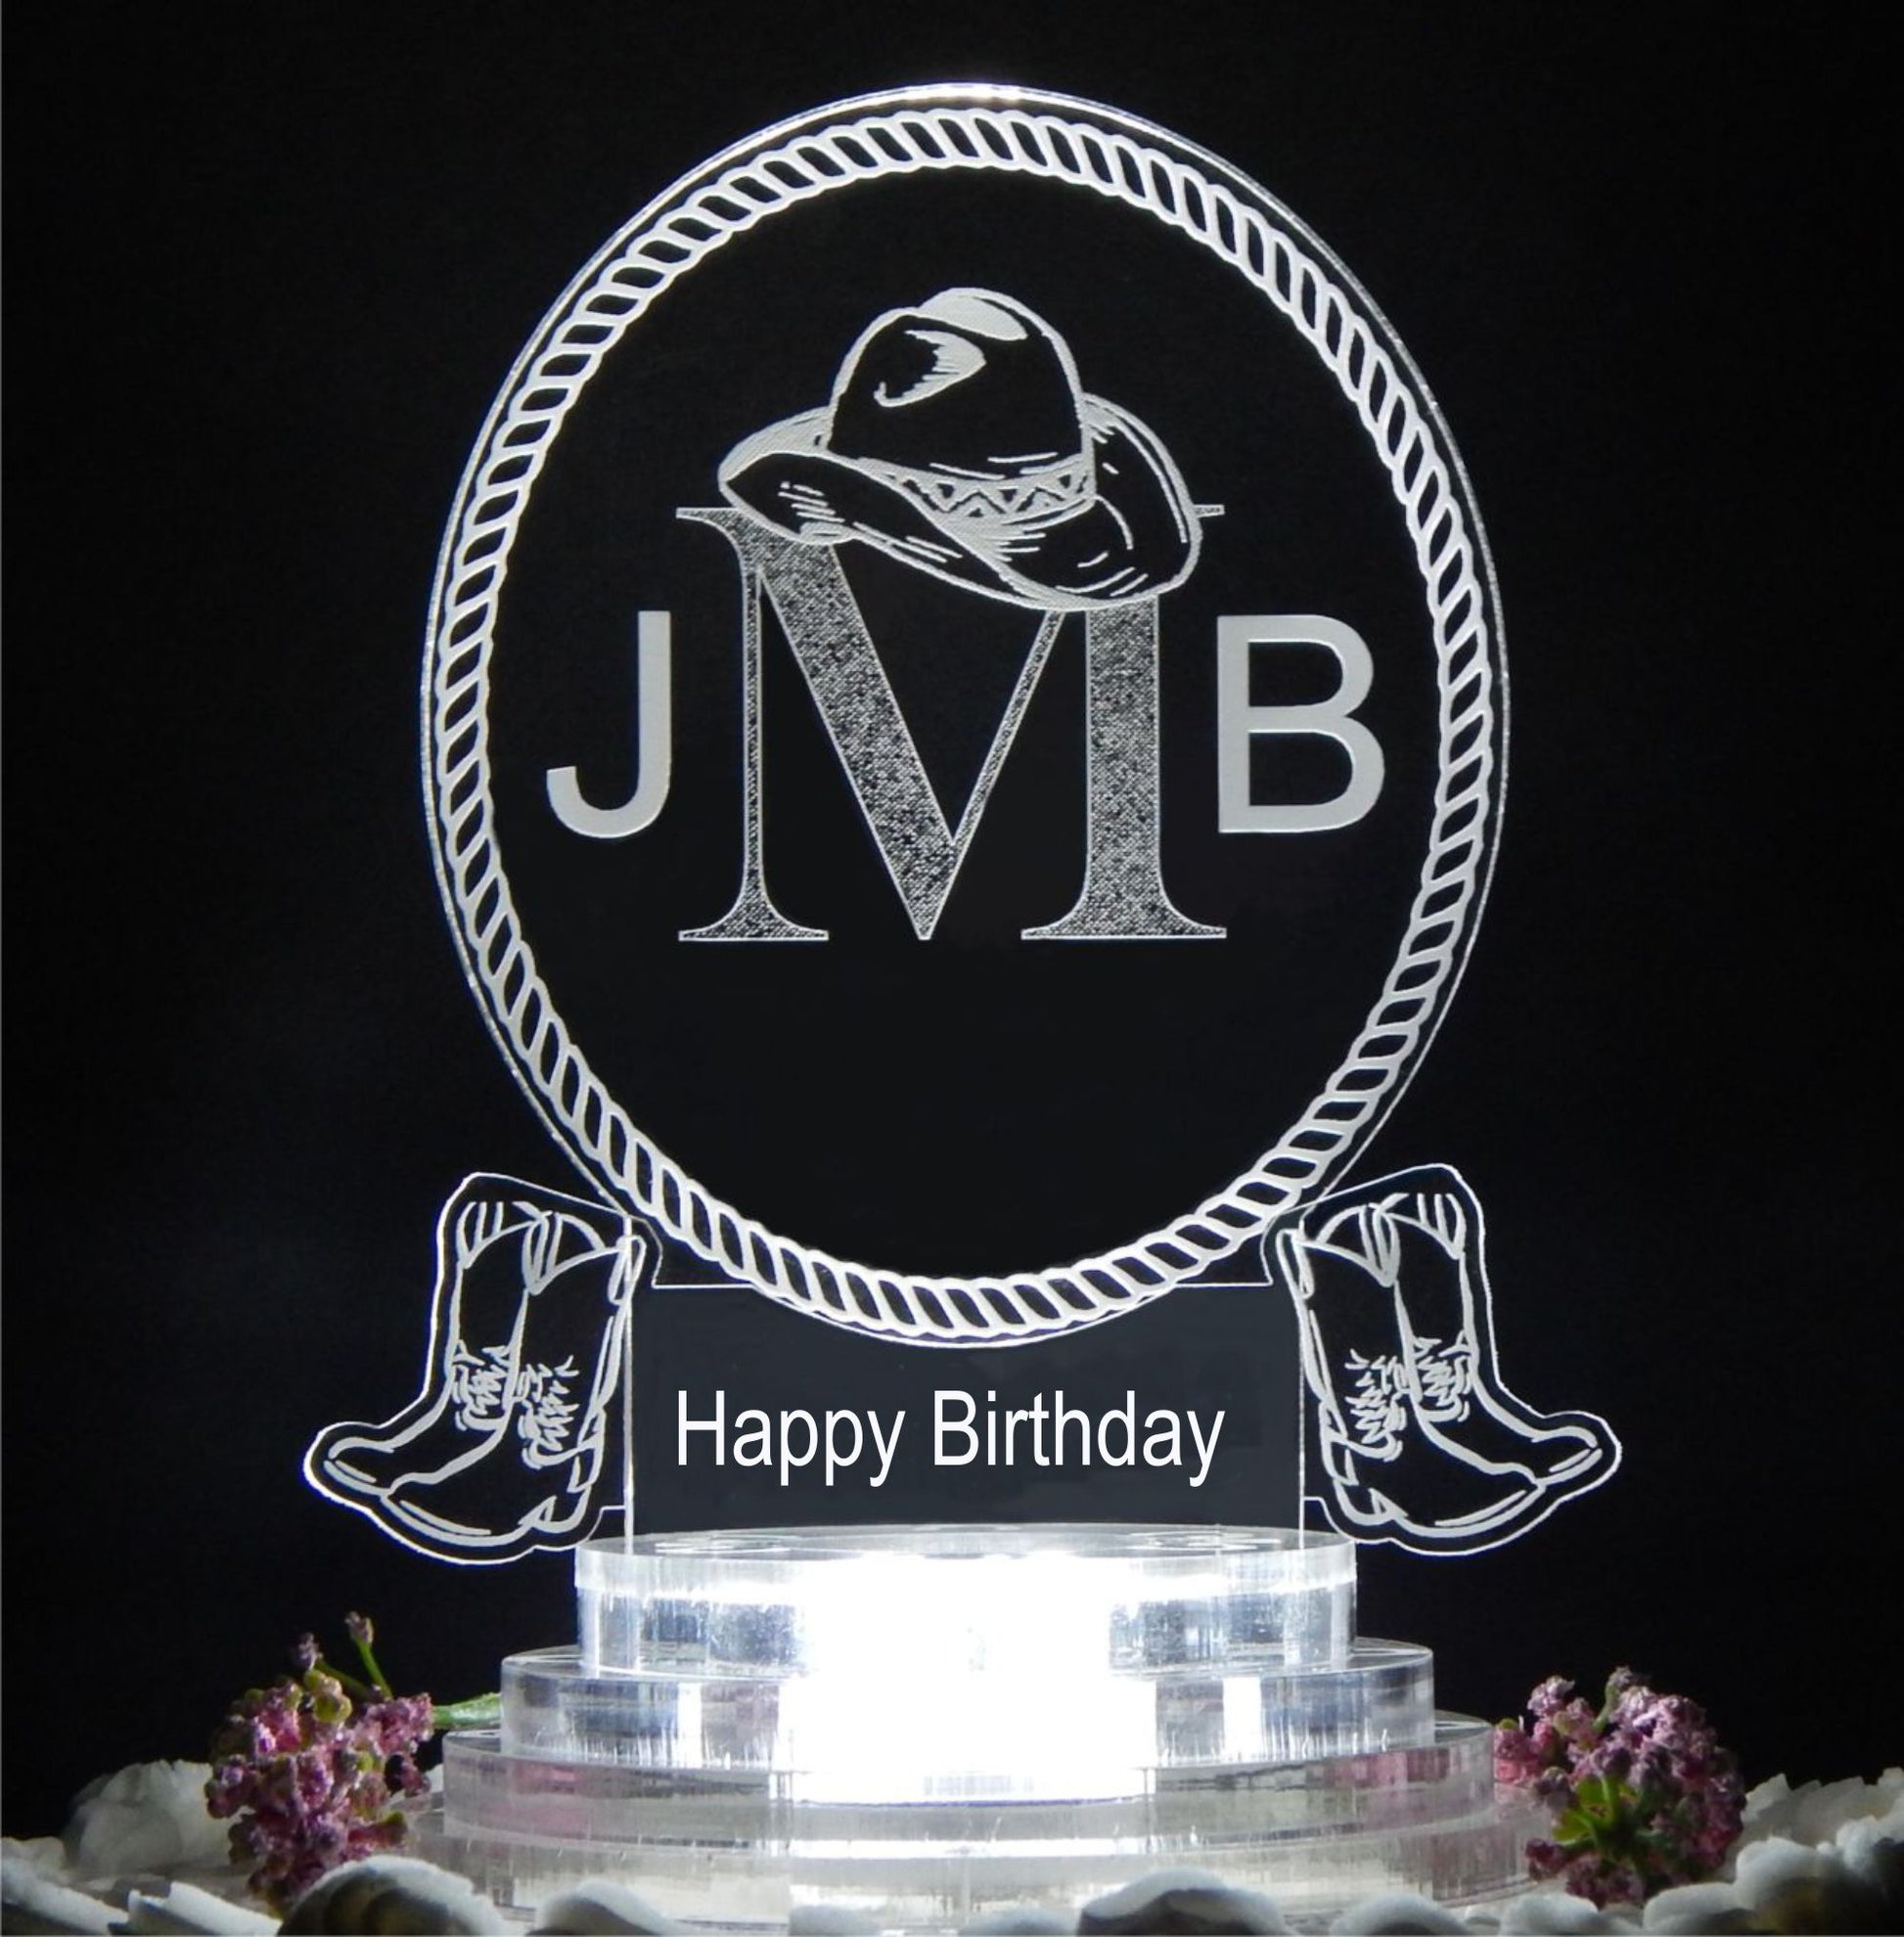 clear acrylic oval cake topper designed in a western cowboy theme engraved with a 3 letter monogram and Happy Birthday